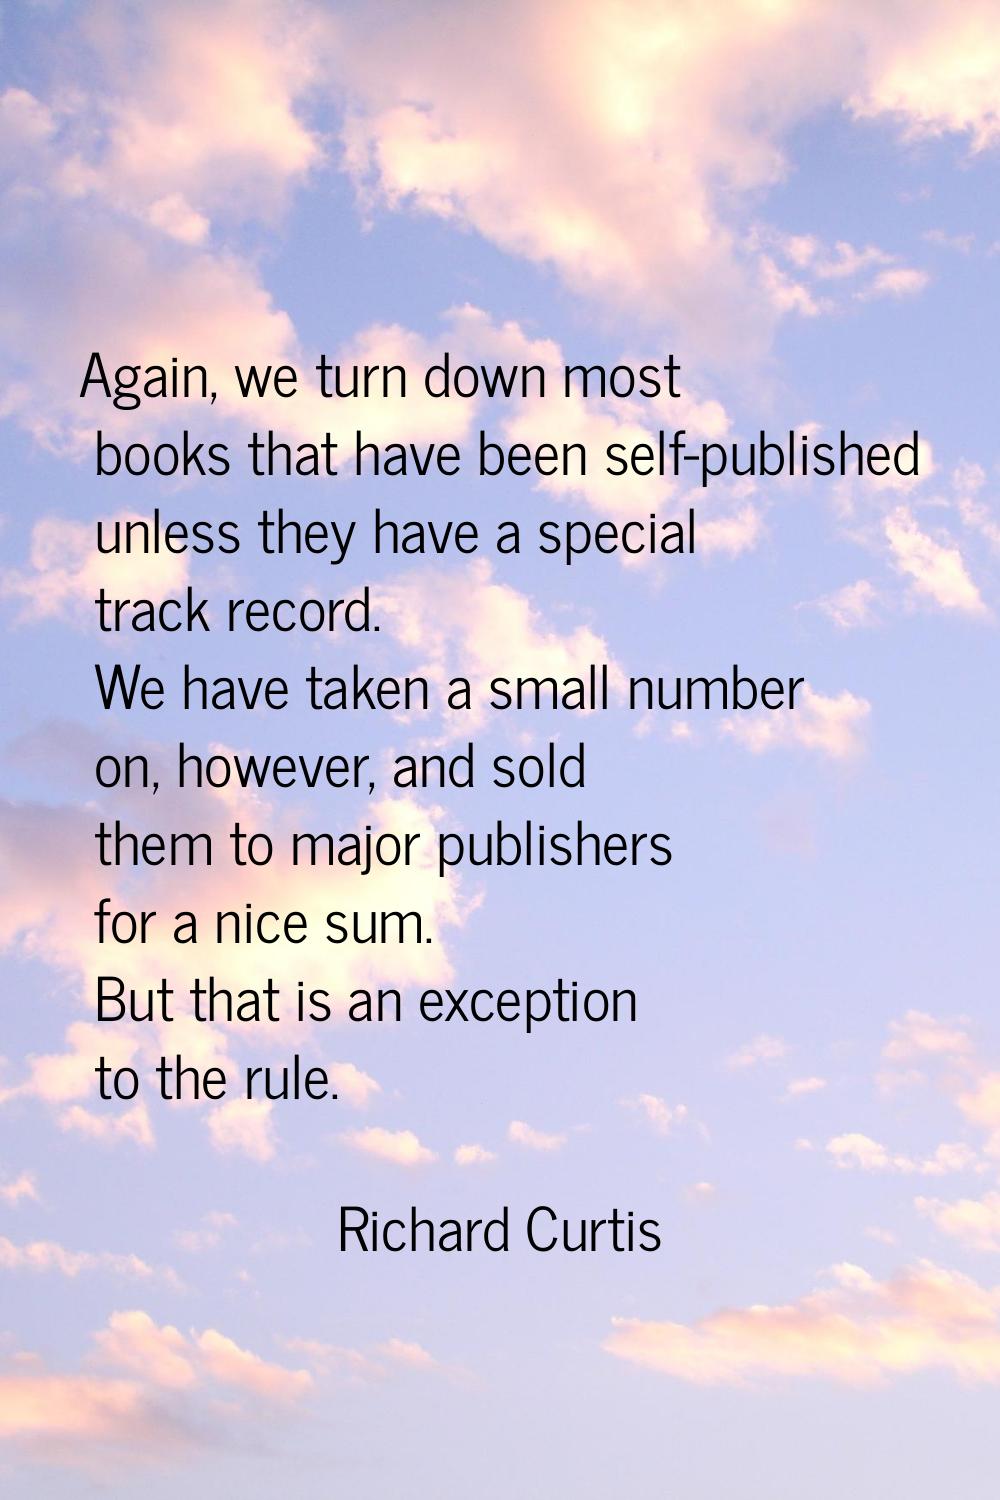 Again, we turn down most books that have been self-published unless they have a special track recor